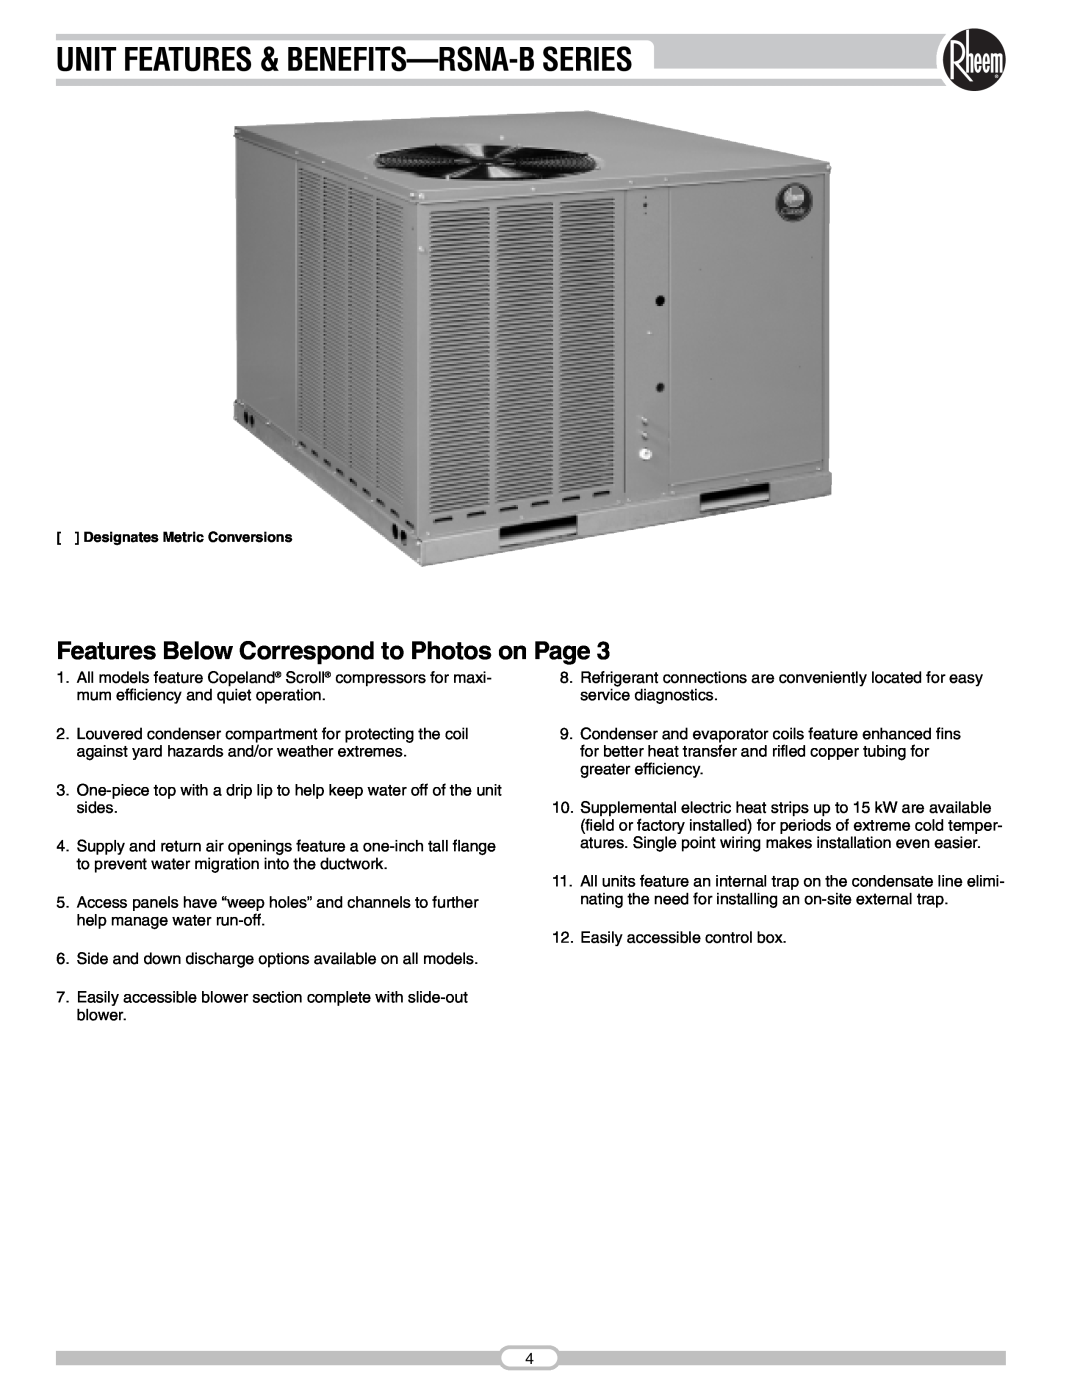 Rheem RSNA-B Series manual Unit Features & Benefits-Rsna-Bseries, Features Below Correspond to Photos on Page 